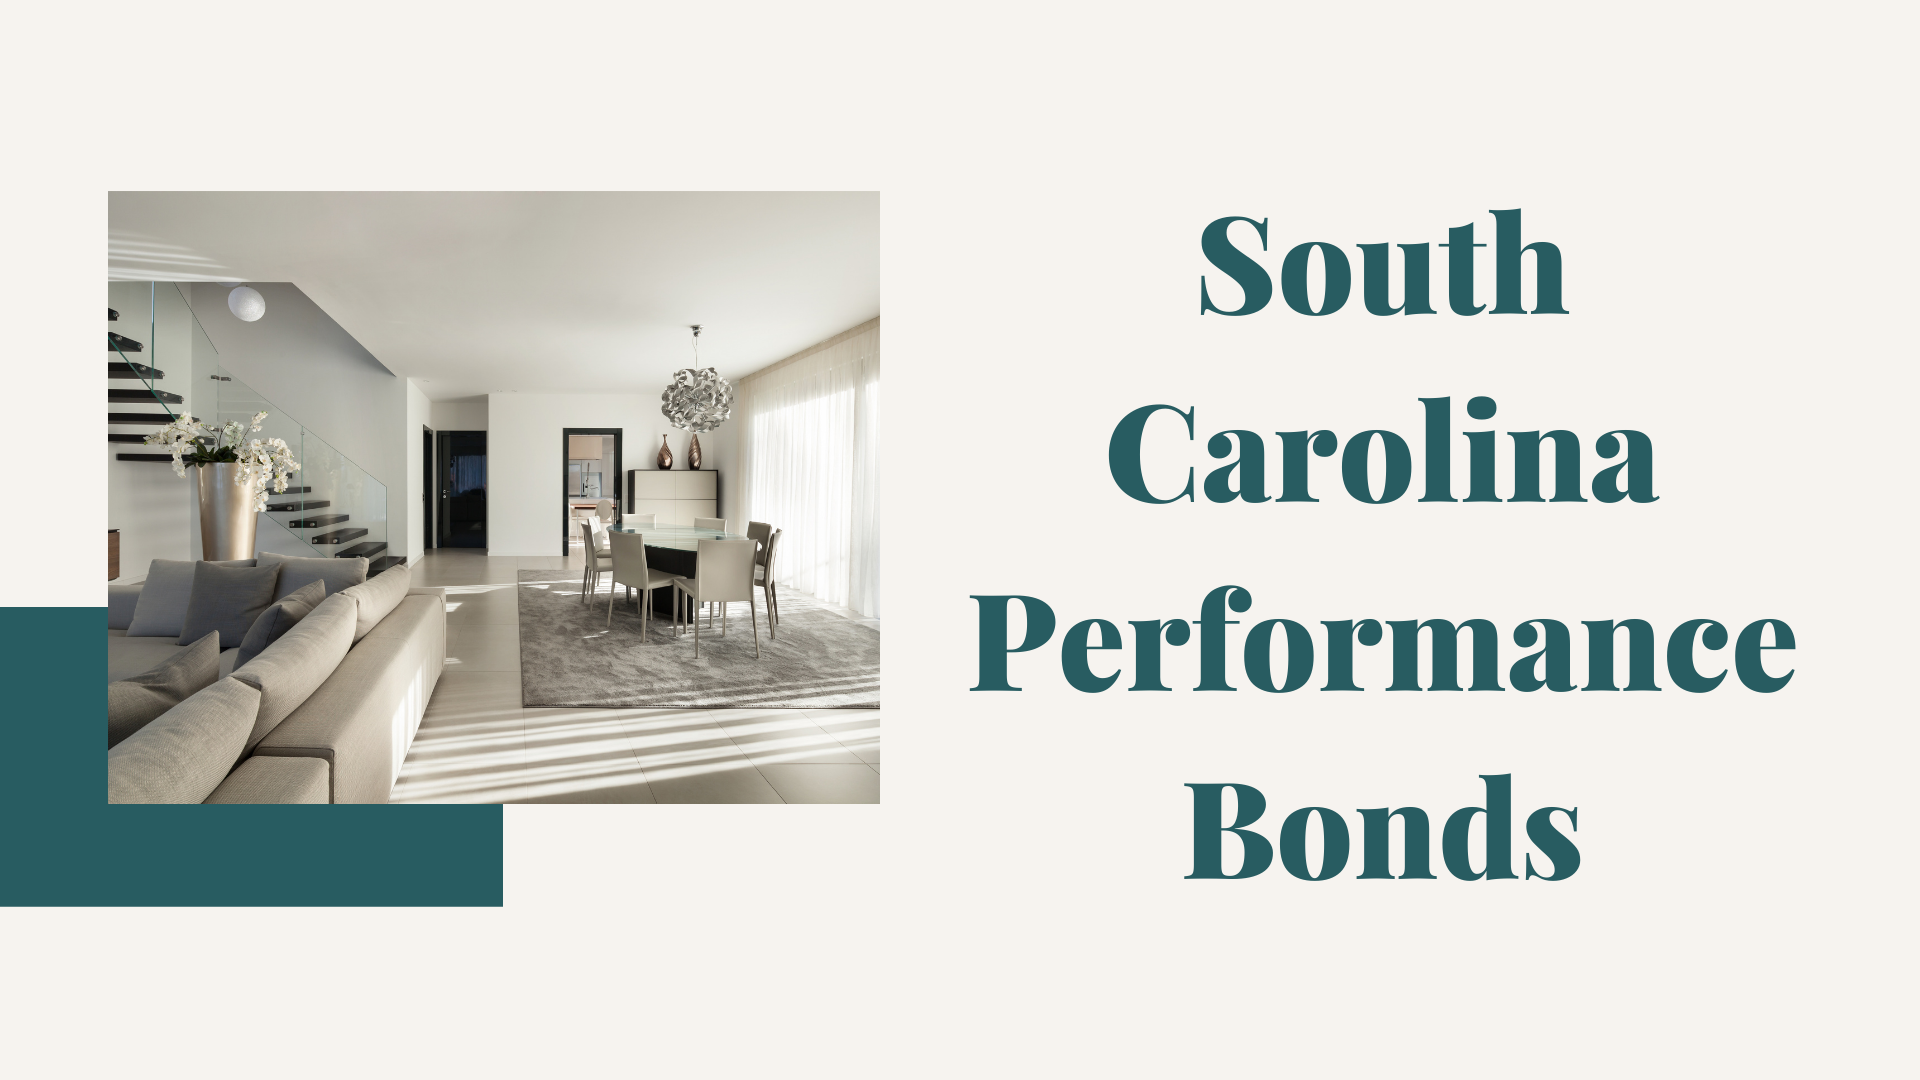 performance bond - What is a Surety Performance Bond in South Carolina